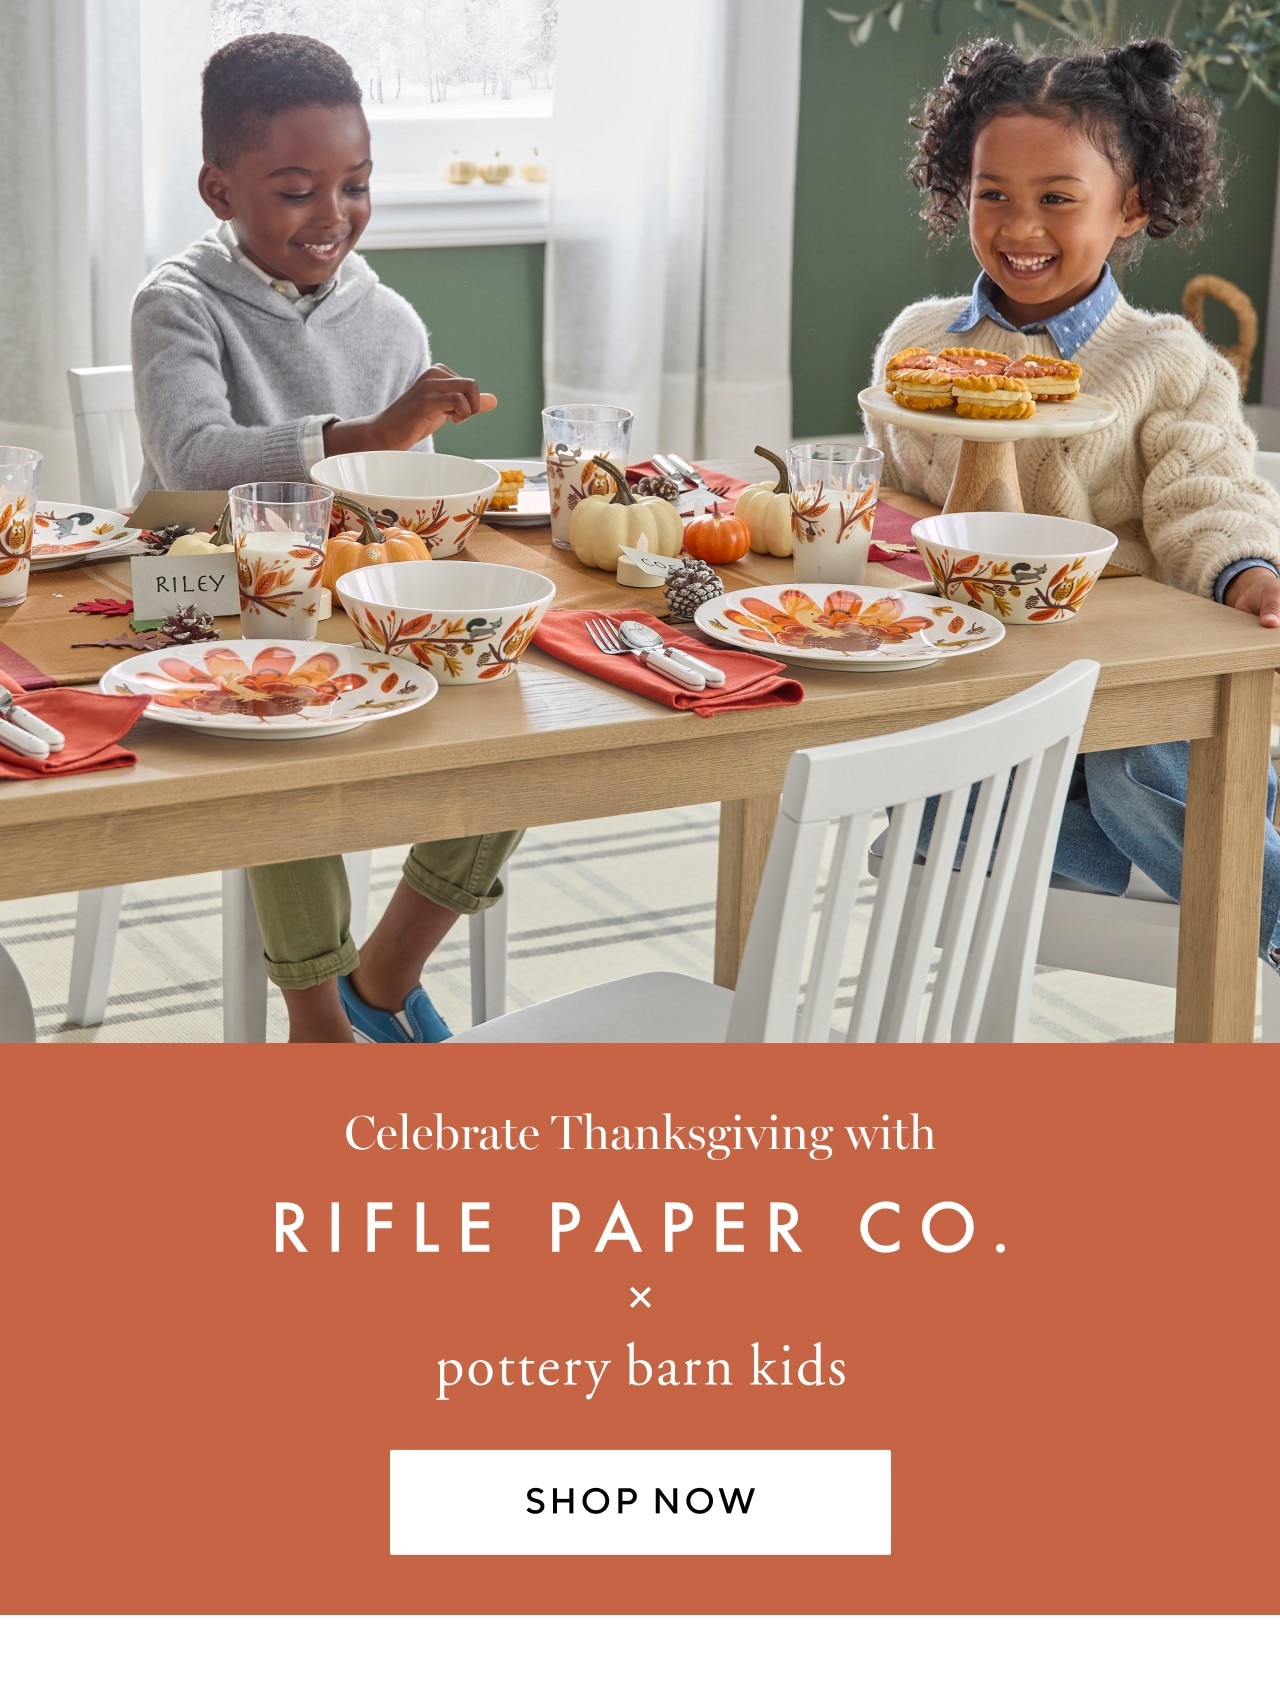 CELEBRATE THANKSGIVING WITH RIFLE PAPER CO. X POTTERY BARN KIDS